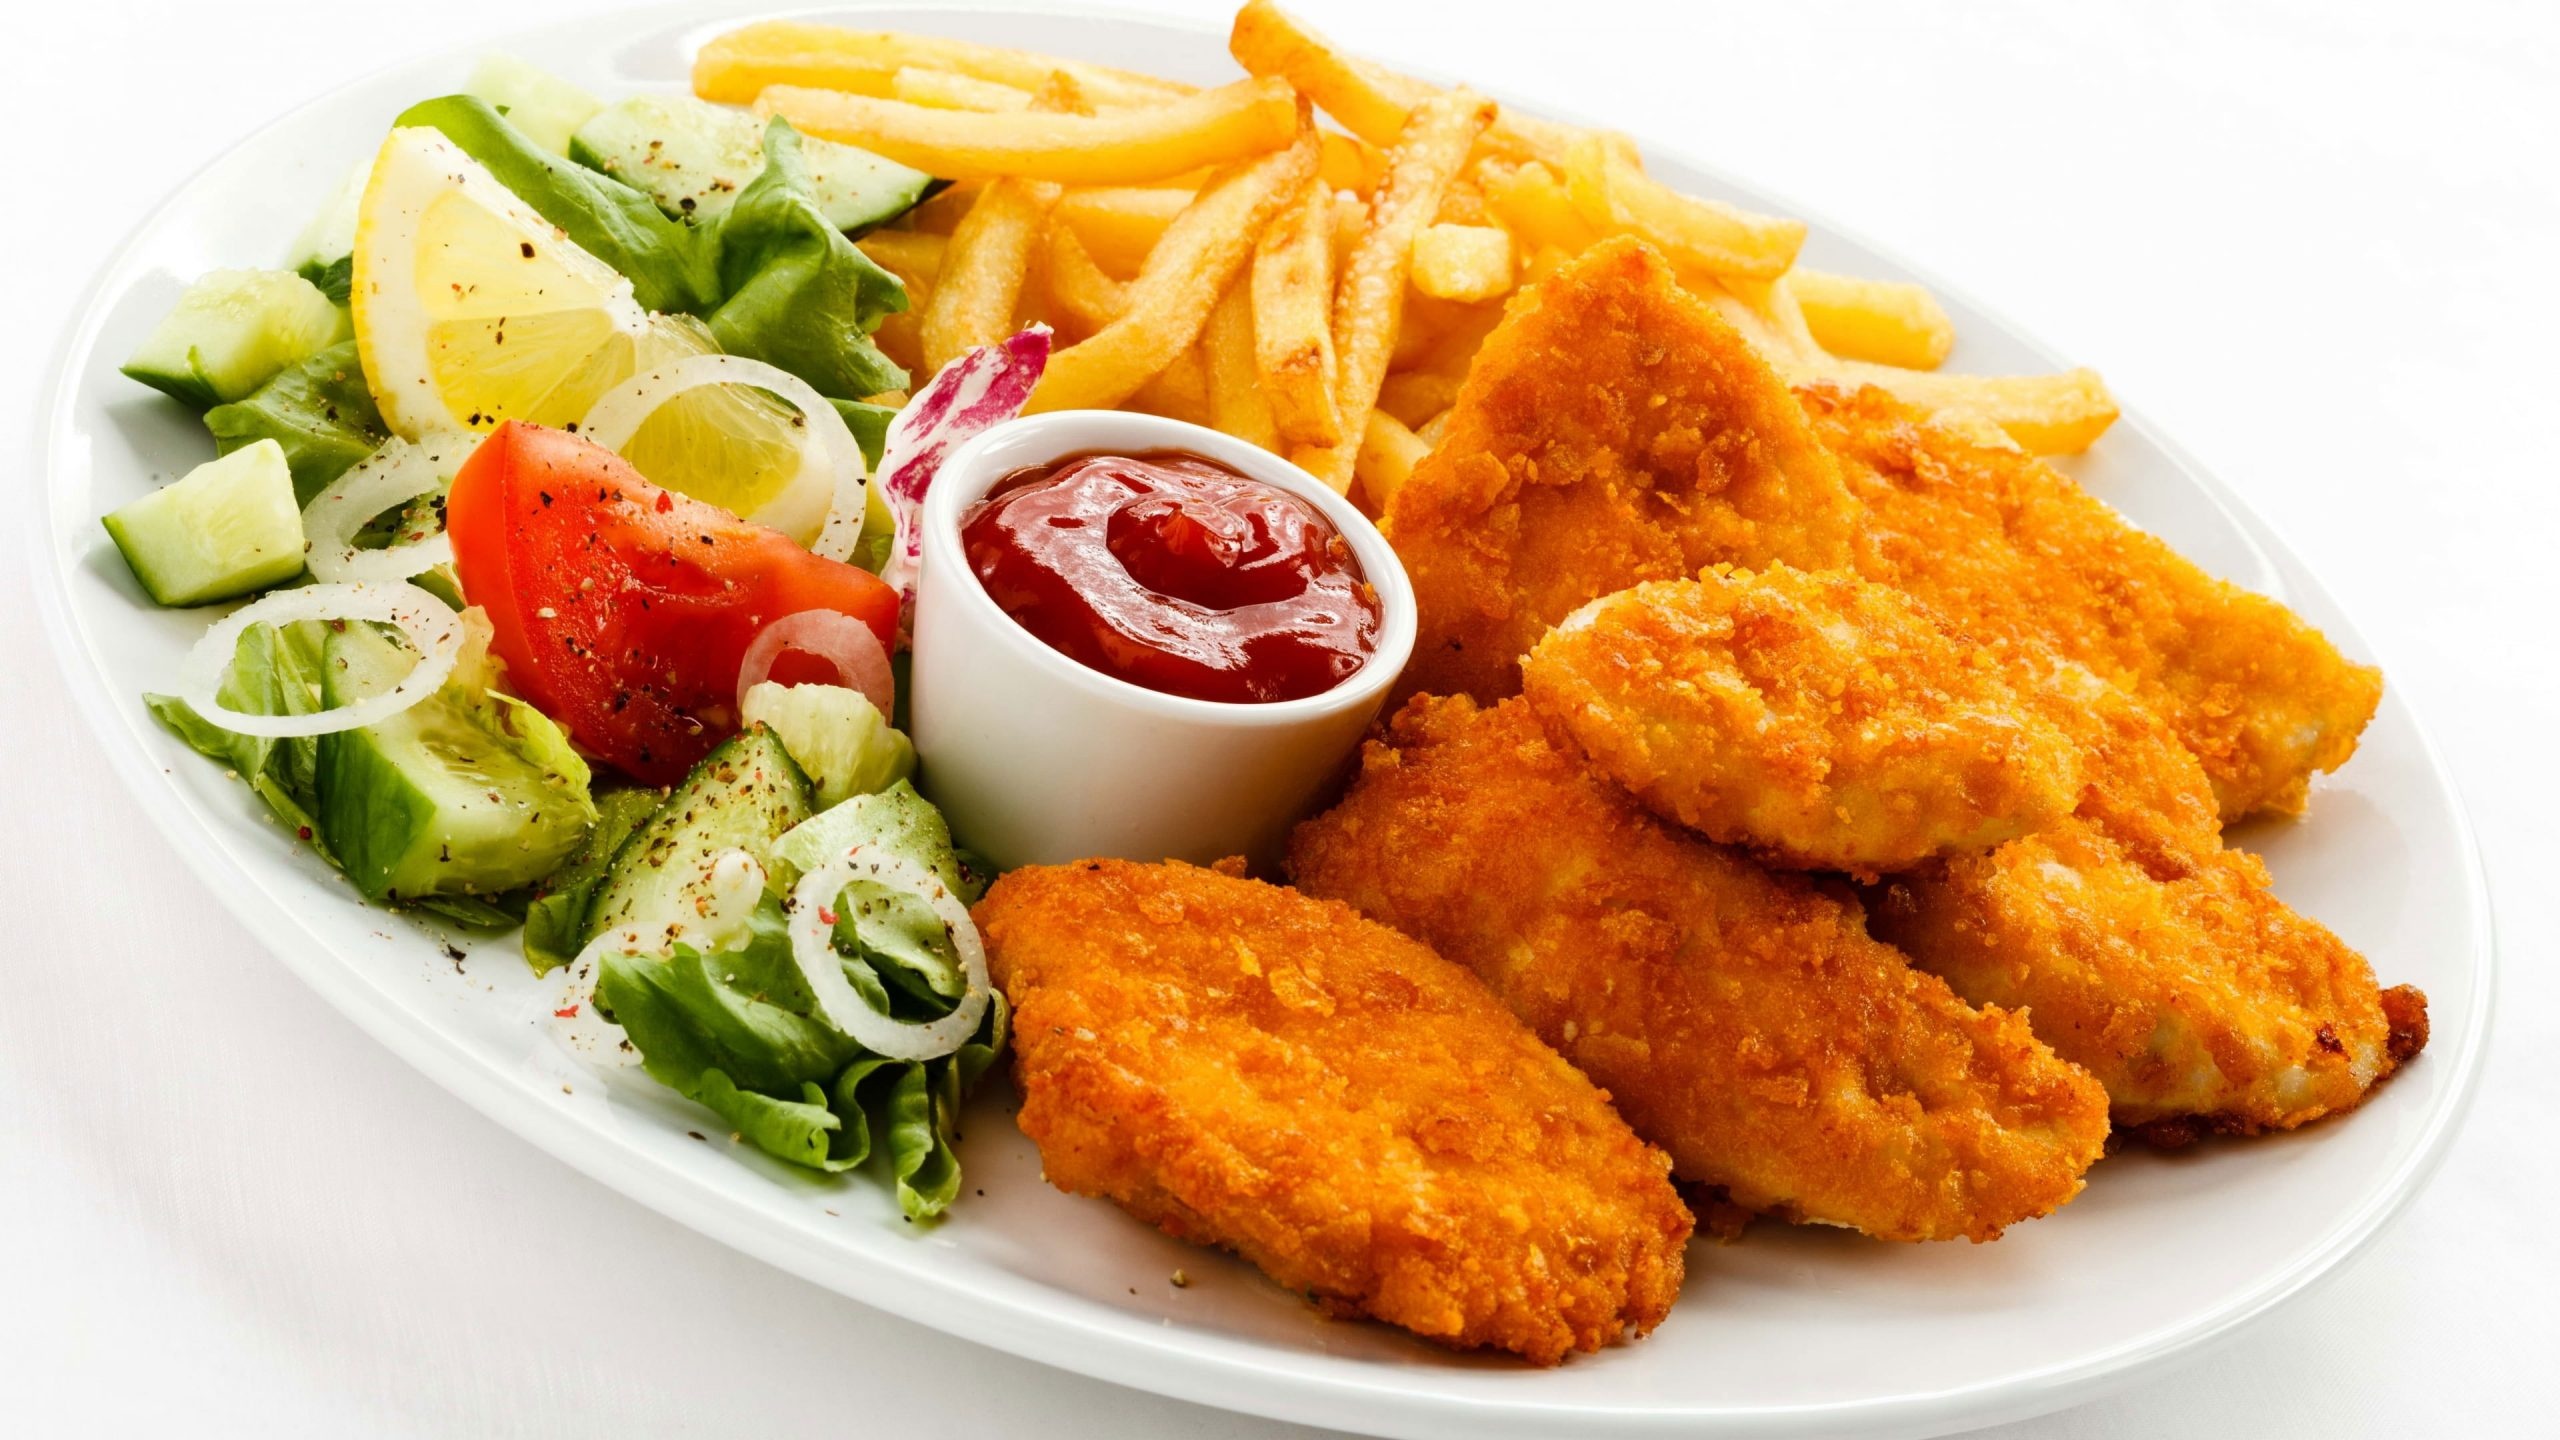 French Fries: Chicken Fillet With Chips And Dip, Fast Food, Deep Frying. 2560x1440 HD Wallpaper.